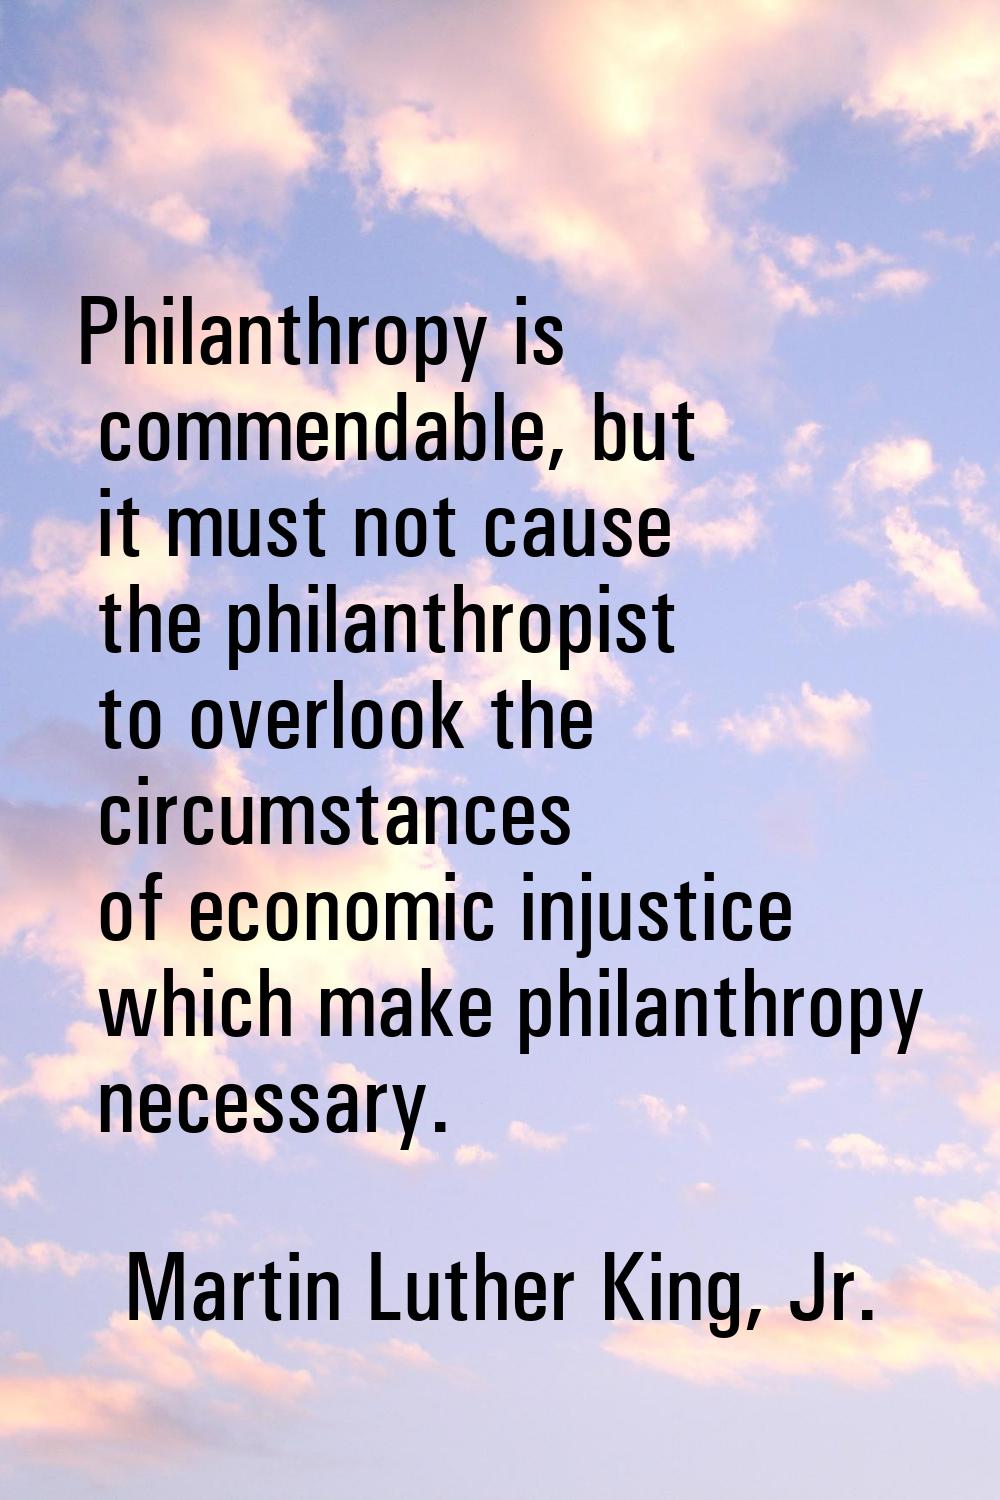 Philanthropy is commendable, but it must not cause the philanthropist to overlook the circumstances